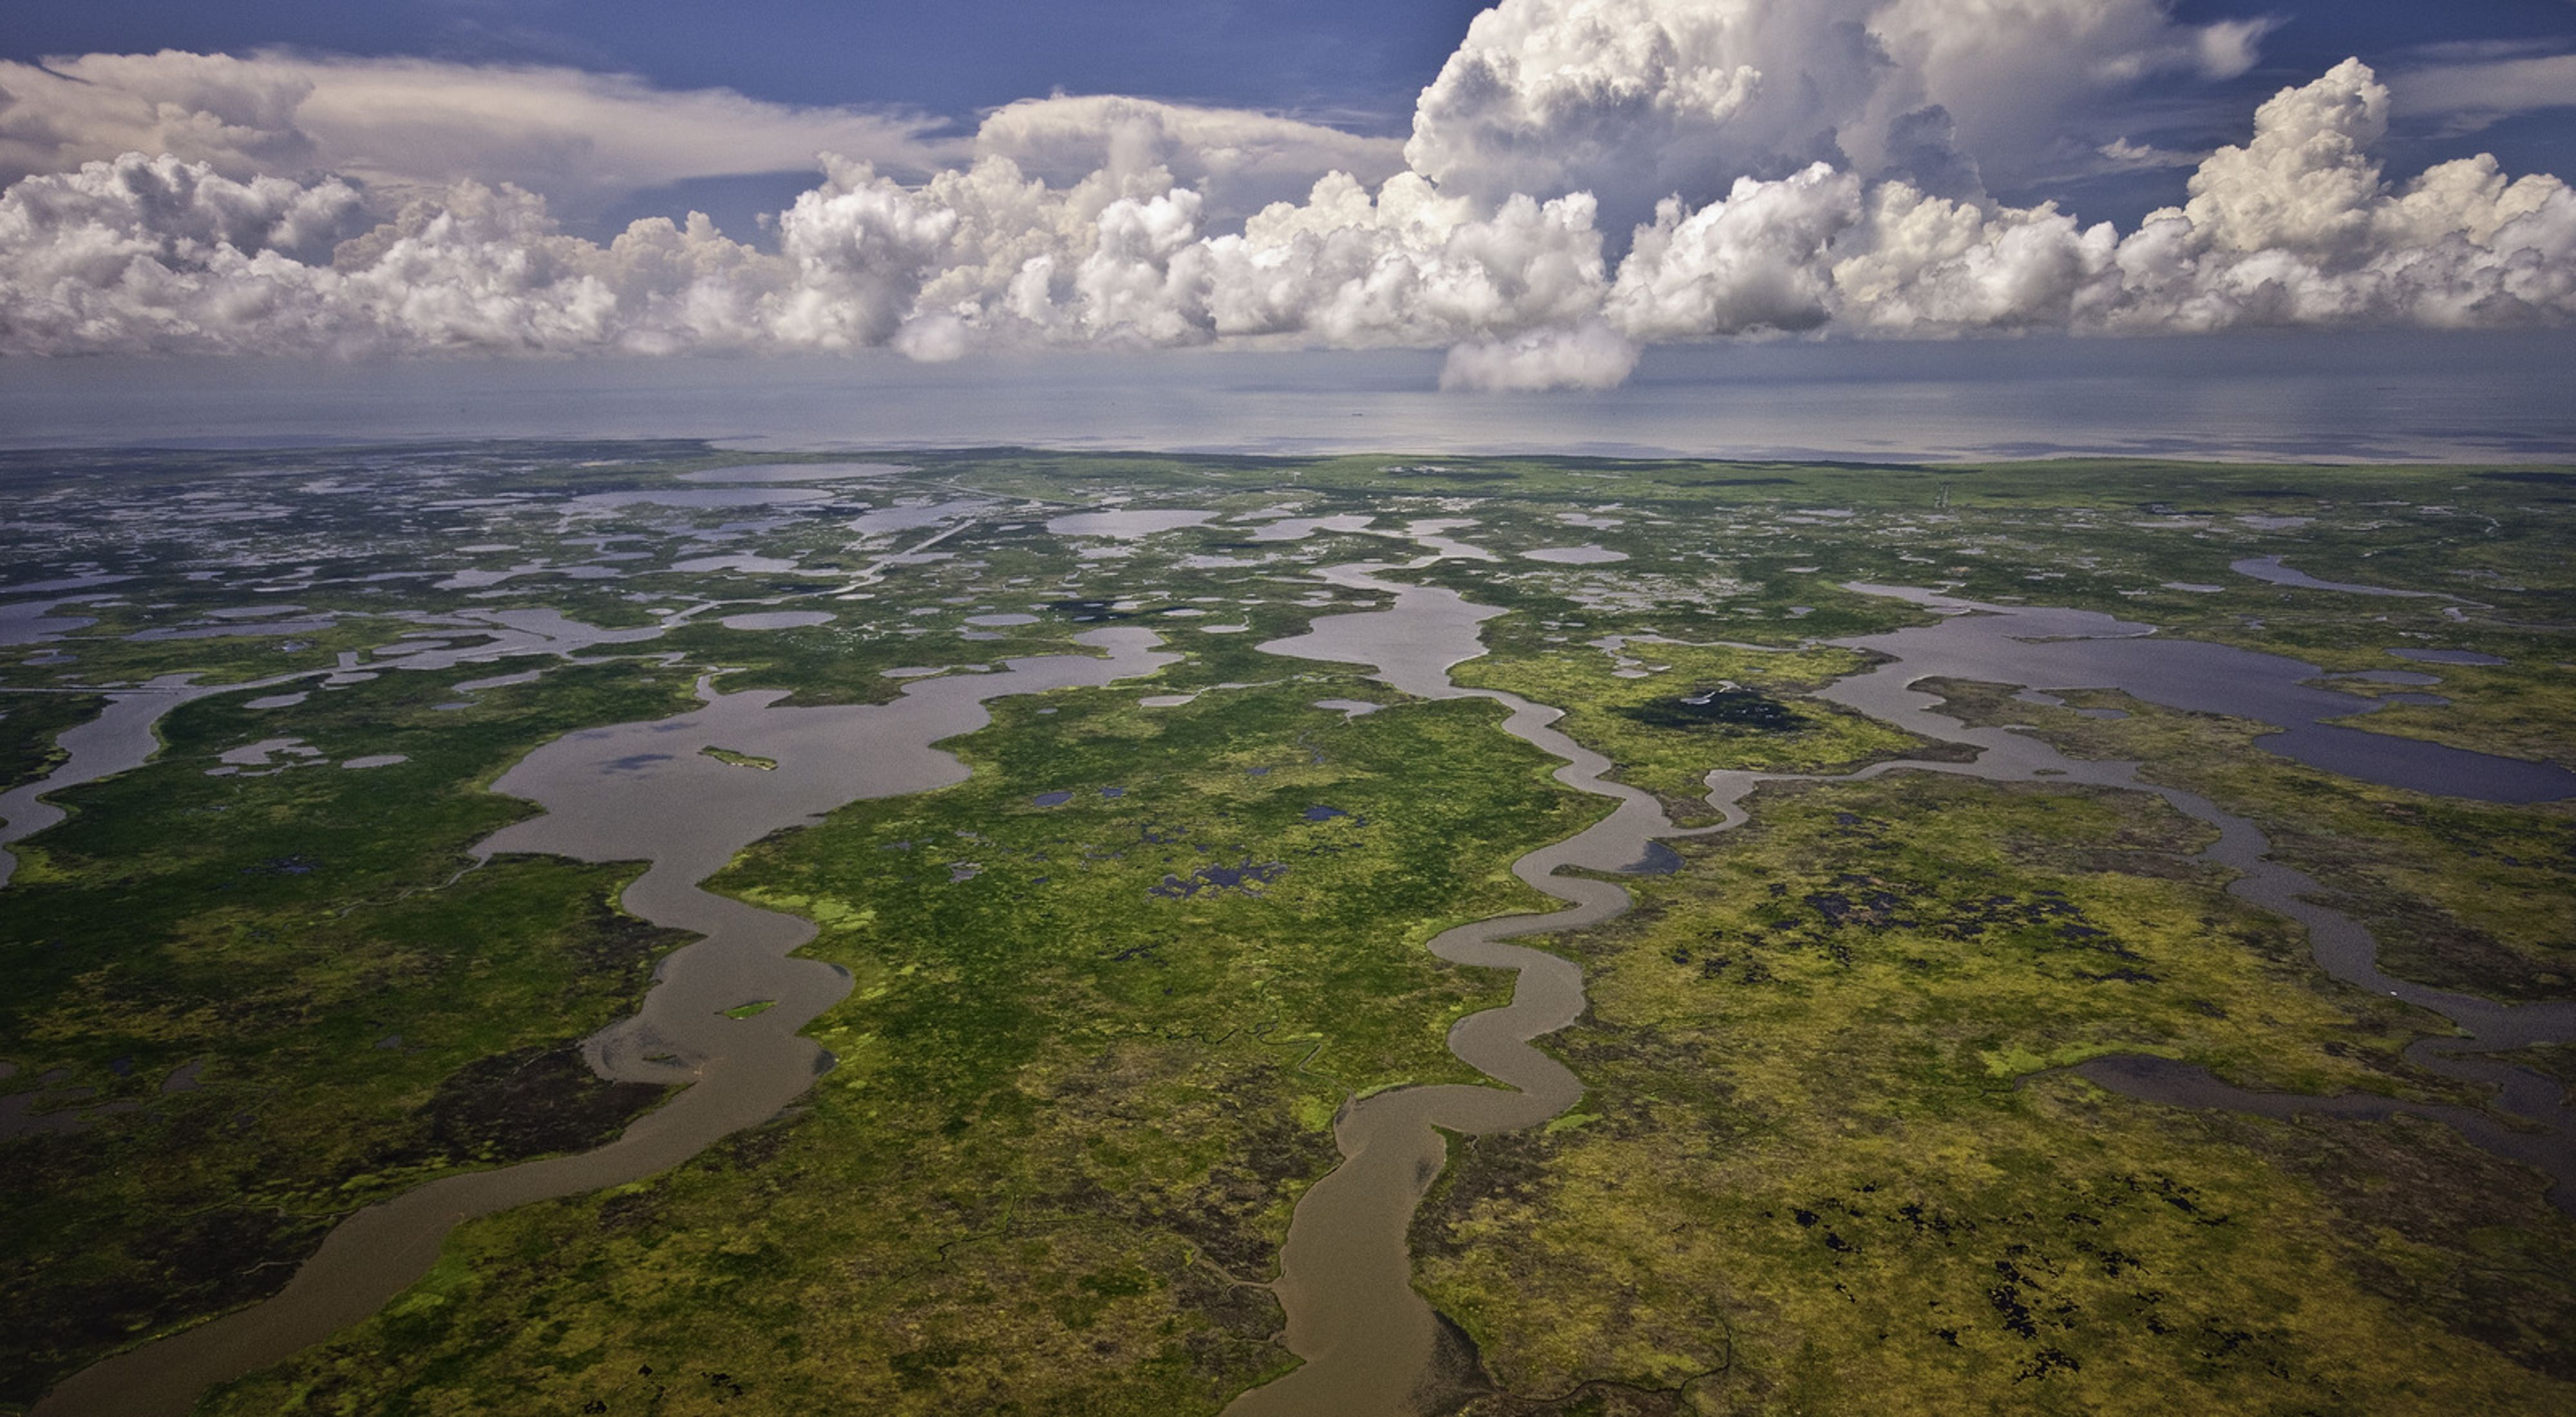 Aerial view of wetlands and marshlands that comprise the Mississippi River delta on the Louisiana Gulf Coast